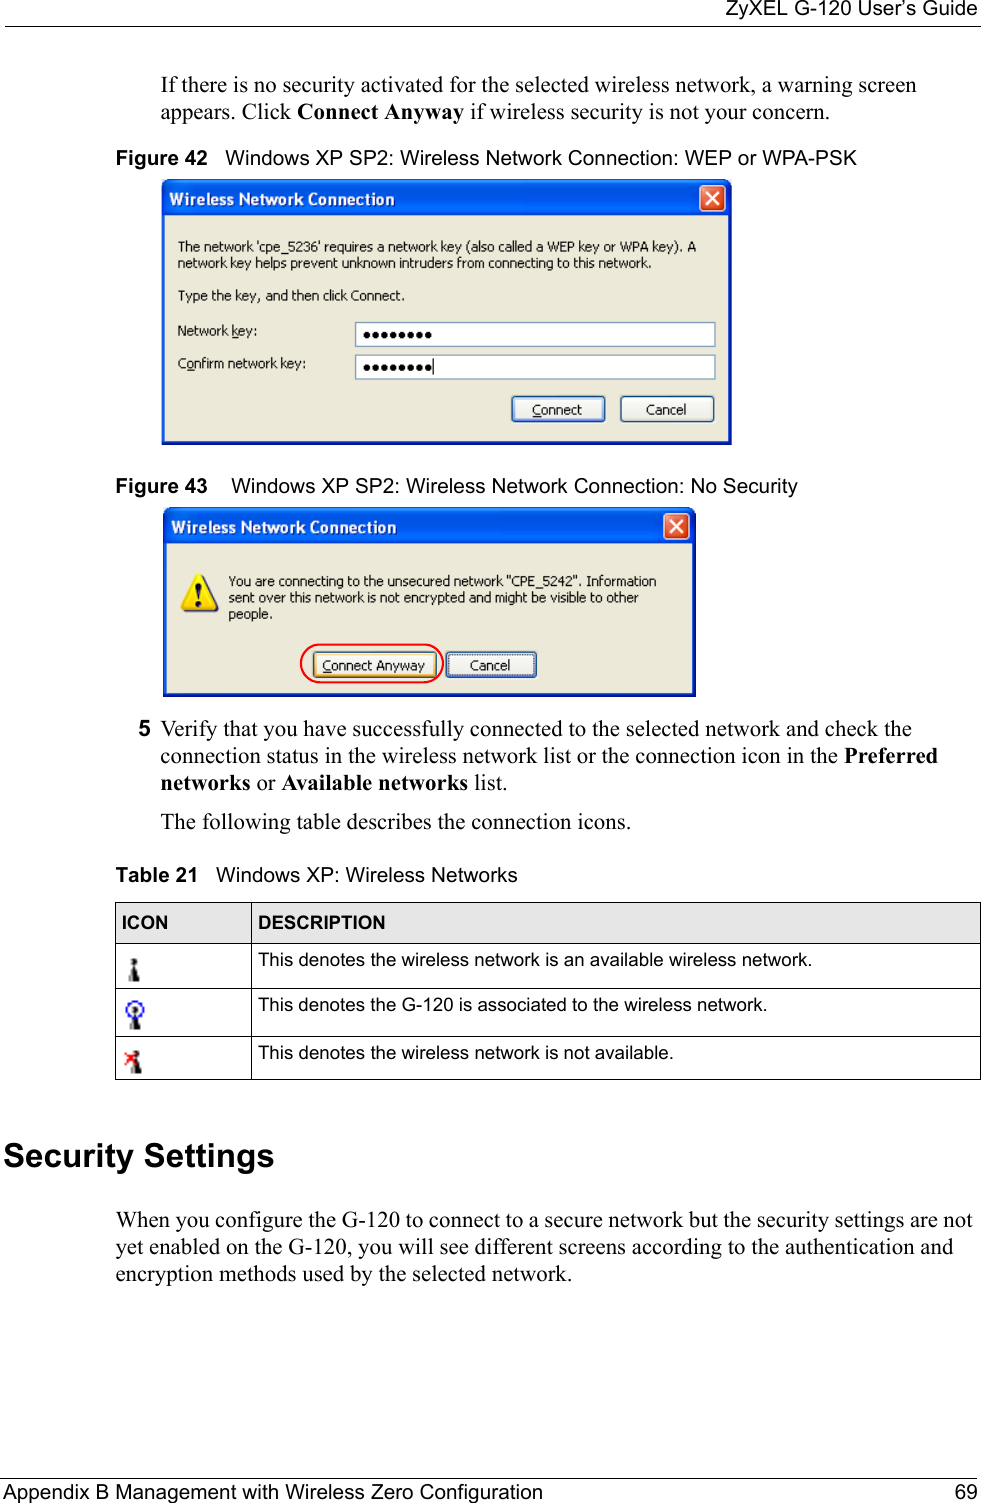 ZyXEL G-120 User’s GuideAppendix B Management with Wireless Zero Configuration 69If there is no security activated for the selected wireless network, a warning screen appears. Click Connect Anyway if wireless security is not your concern.Figure 42   Windows XP SP2: Wireless Network Connection: WEP or WPA-PSKFigure 43    Windows XP SP2: Wireless Network Connection: No Security5Verify that you have successfully connected to the selected network and check the connection status in the wireless network list or the connection icon in the Preferred networks or Available networks list.The following table describes the connection icons.Security SettingsWhen you configure the G-120 to connect to a secure network but the security settings are not yet enabled on the G-120, you will see different screens according to the authentication and encryption methods used by the selected network.Table 21   Windows XP: Wireless NetworksICON DESCRIPTIONThis denotes the wireless network is an available wireless network.This denotes the G-120 is associated to the wireless network.This denotes the wireless network is not available.